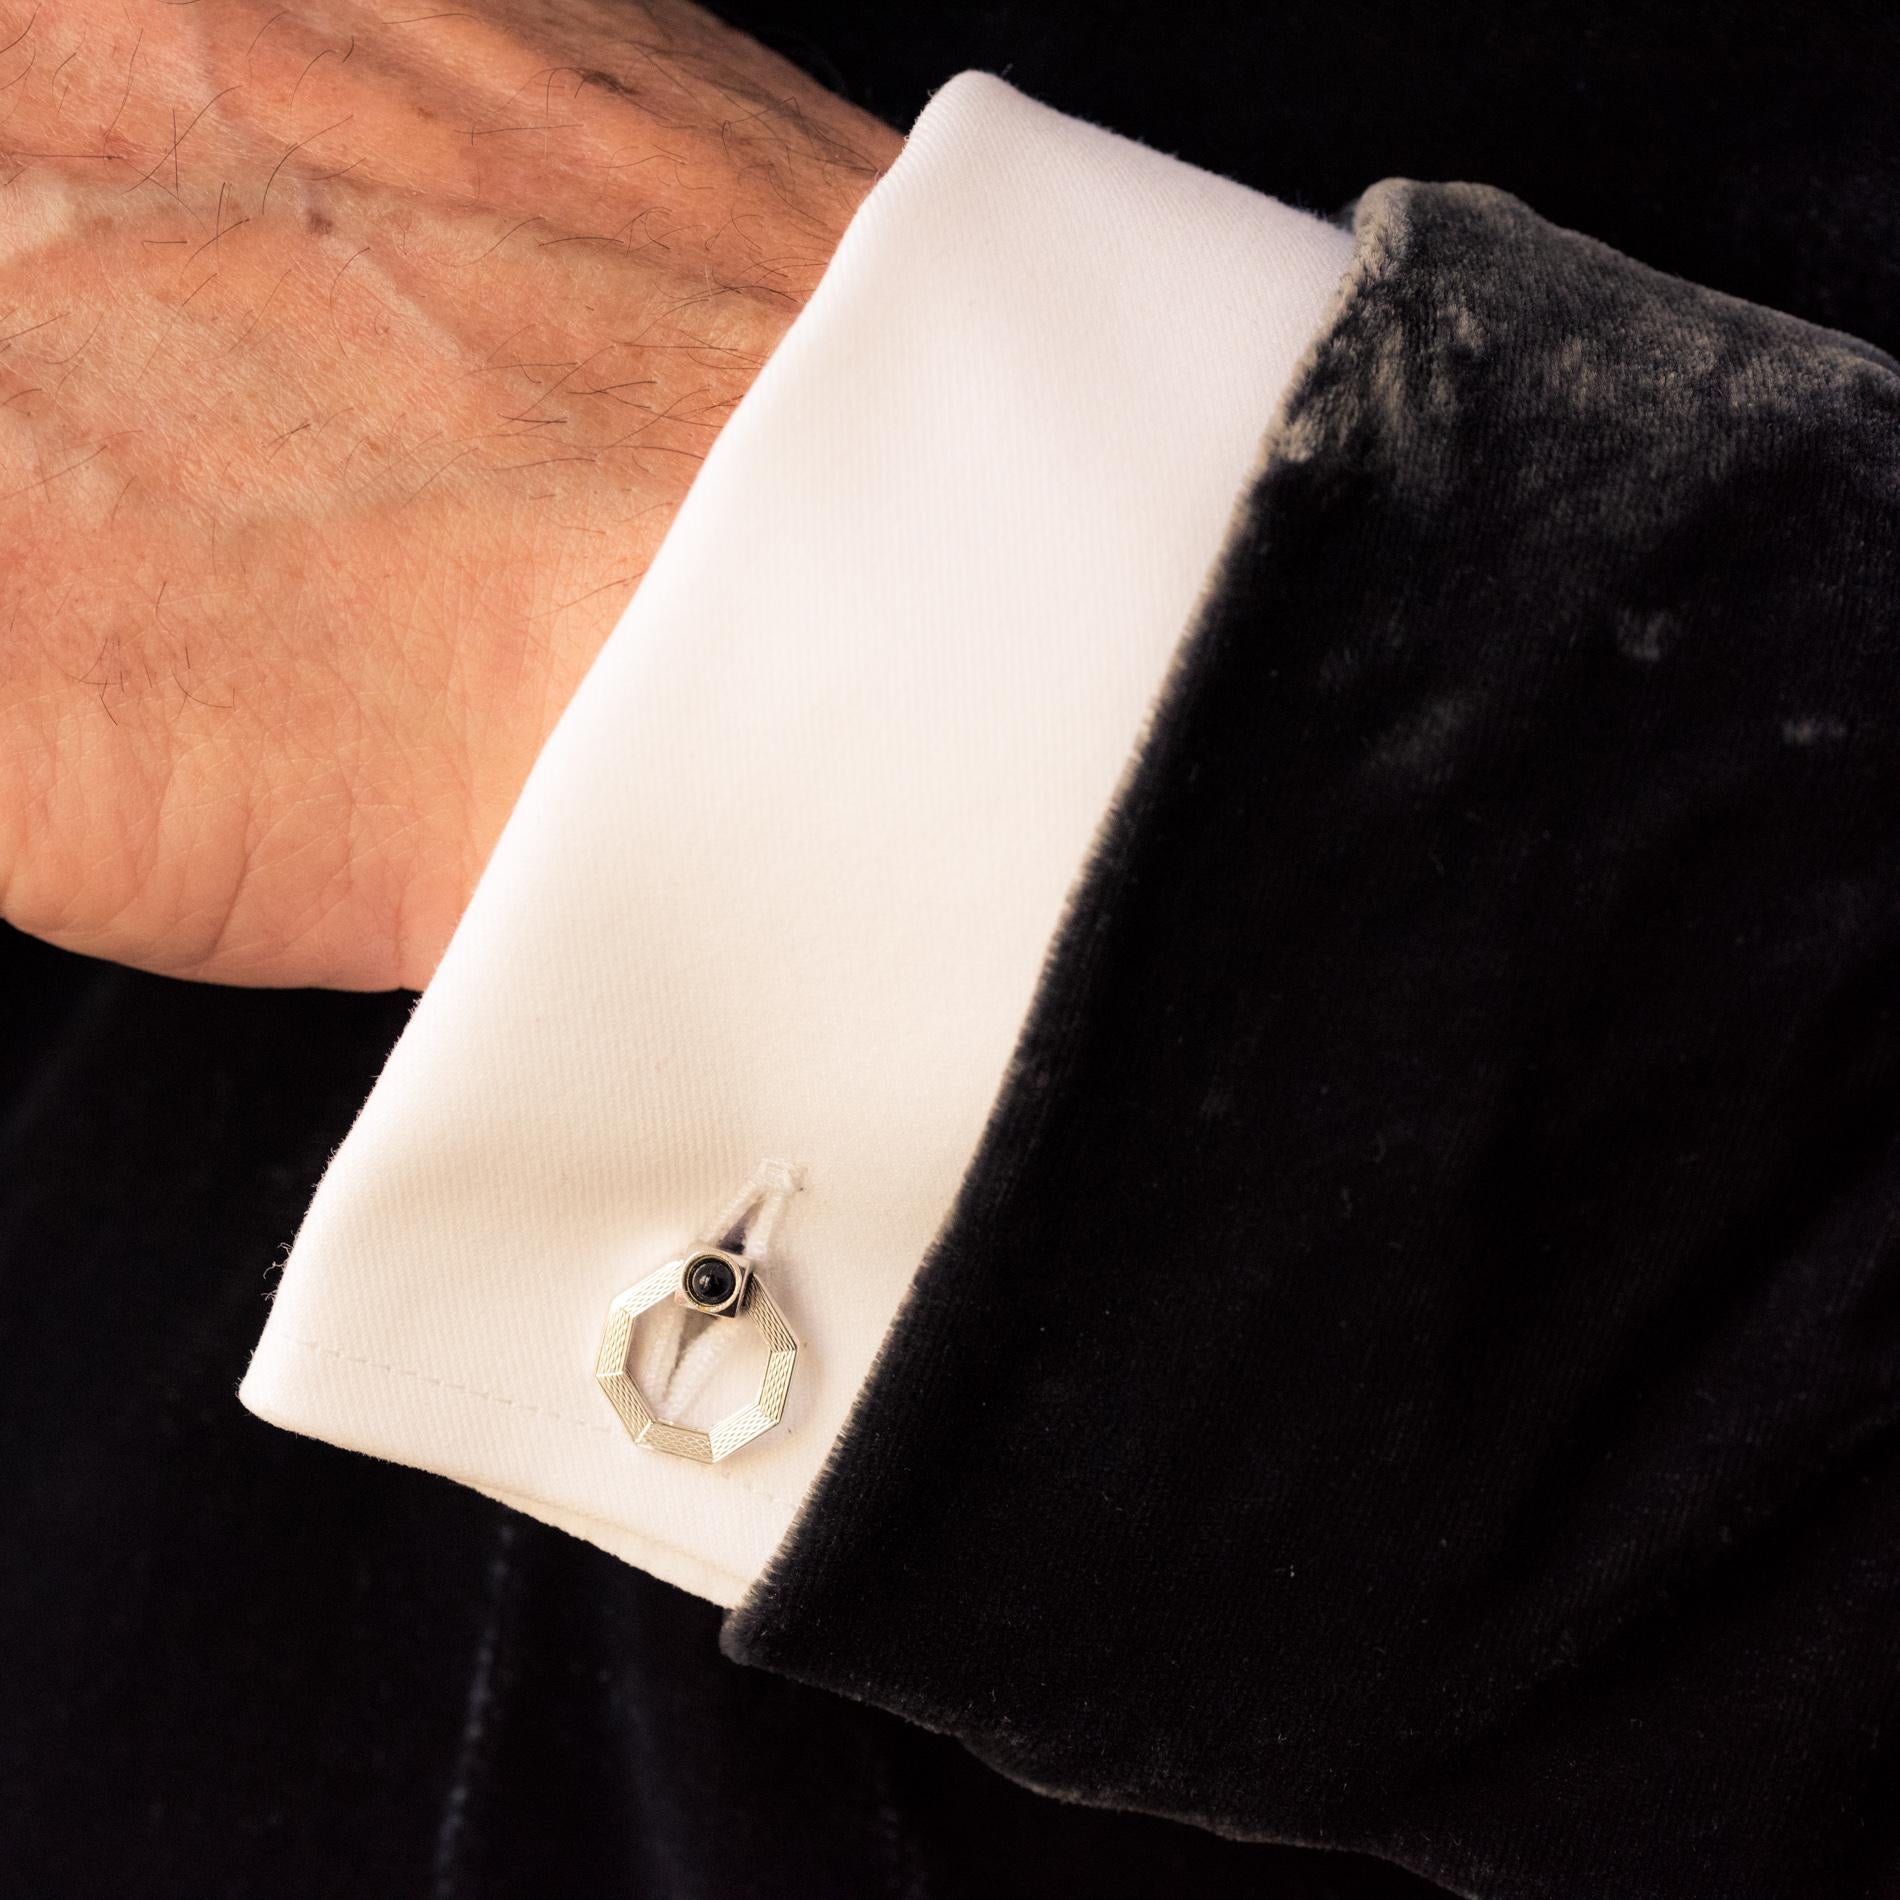 Pair of cufflinks in silver, weevil hallmark.
Each cufflink is formed by a cylinder, each end of which is adorned with a cube set with an black gem cabochon. Two octagons guilloched on one side, faceted on the other, fold to close the cuff.
Signed